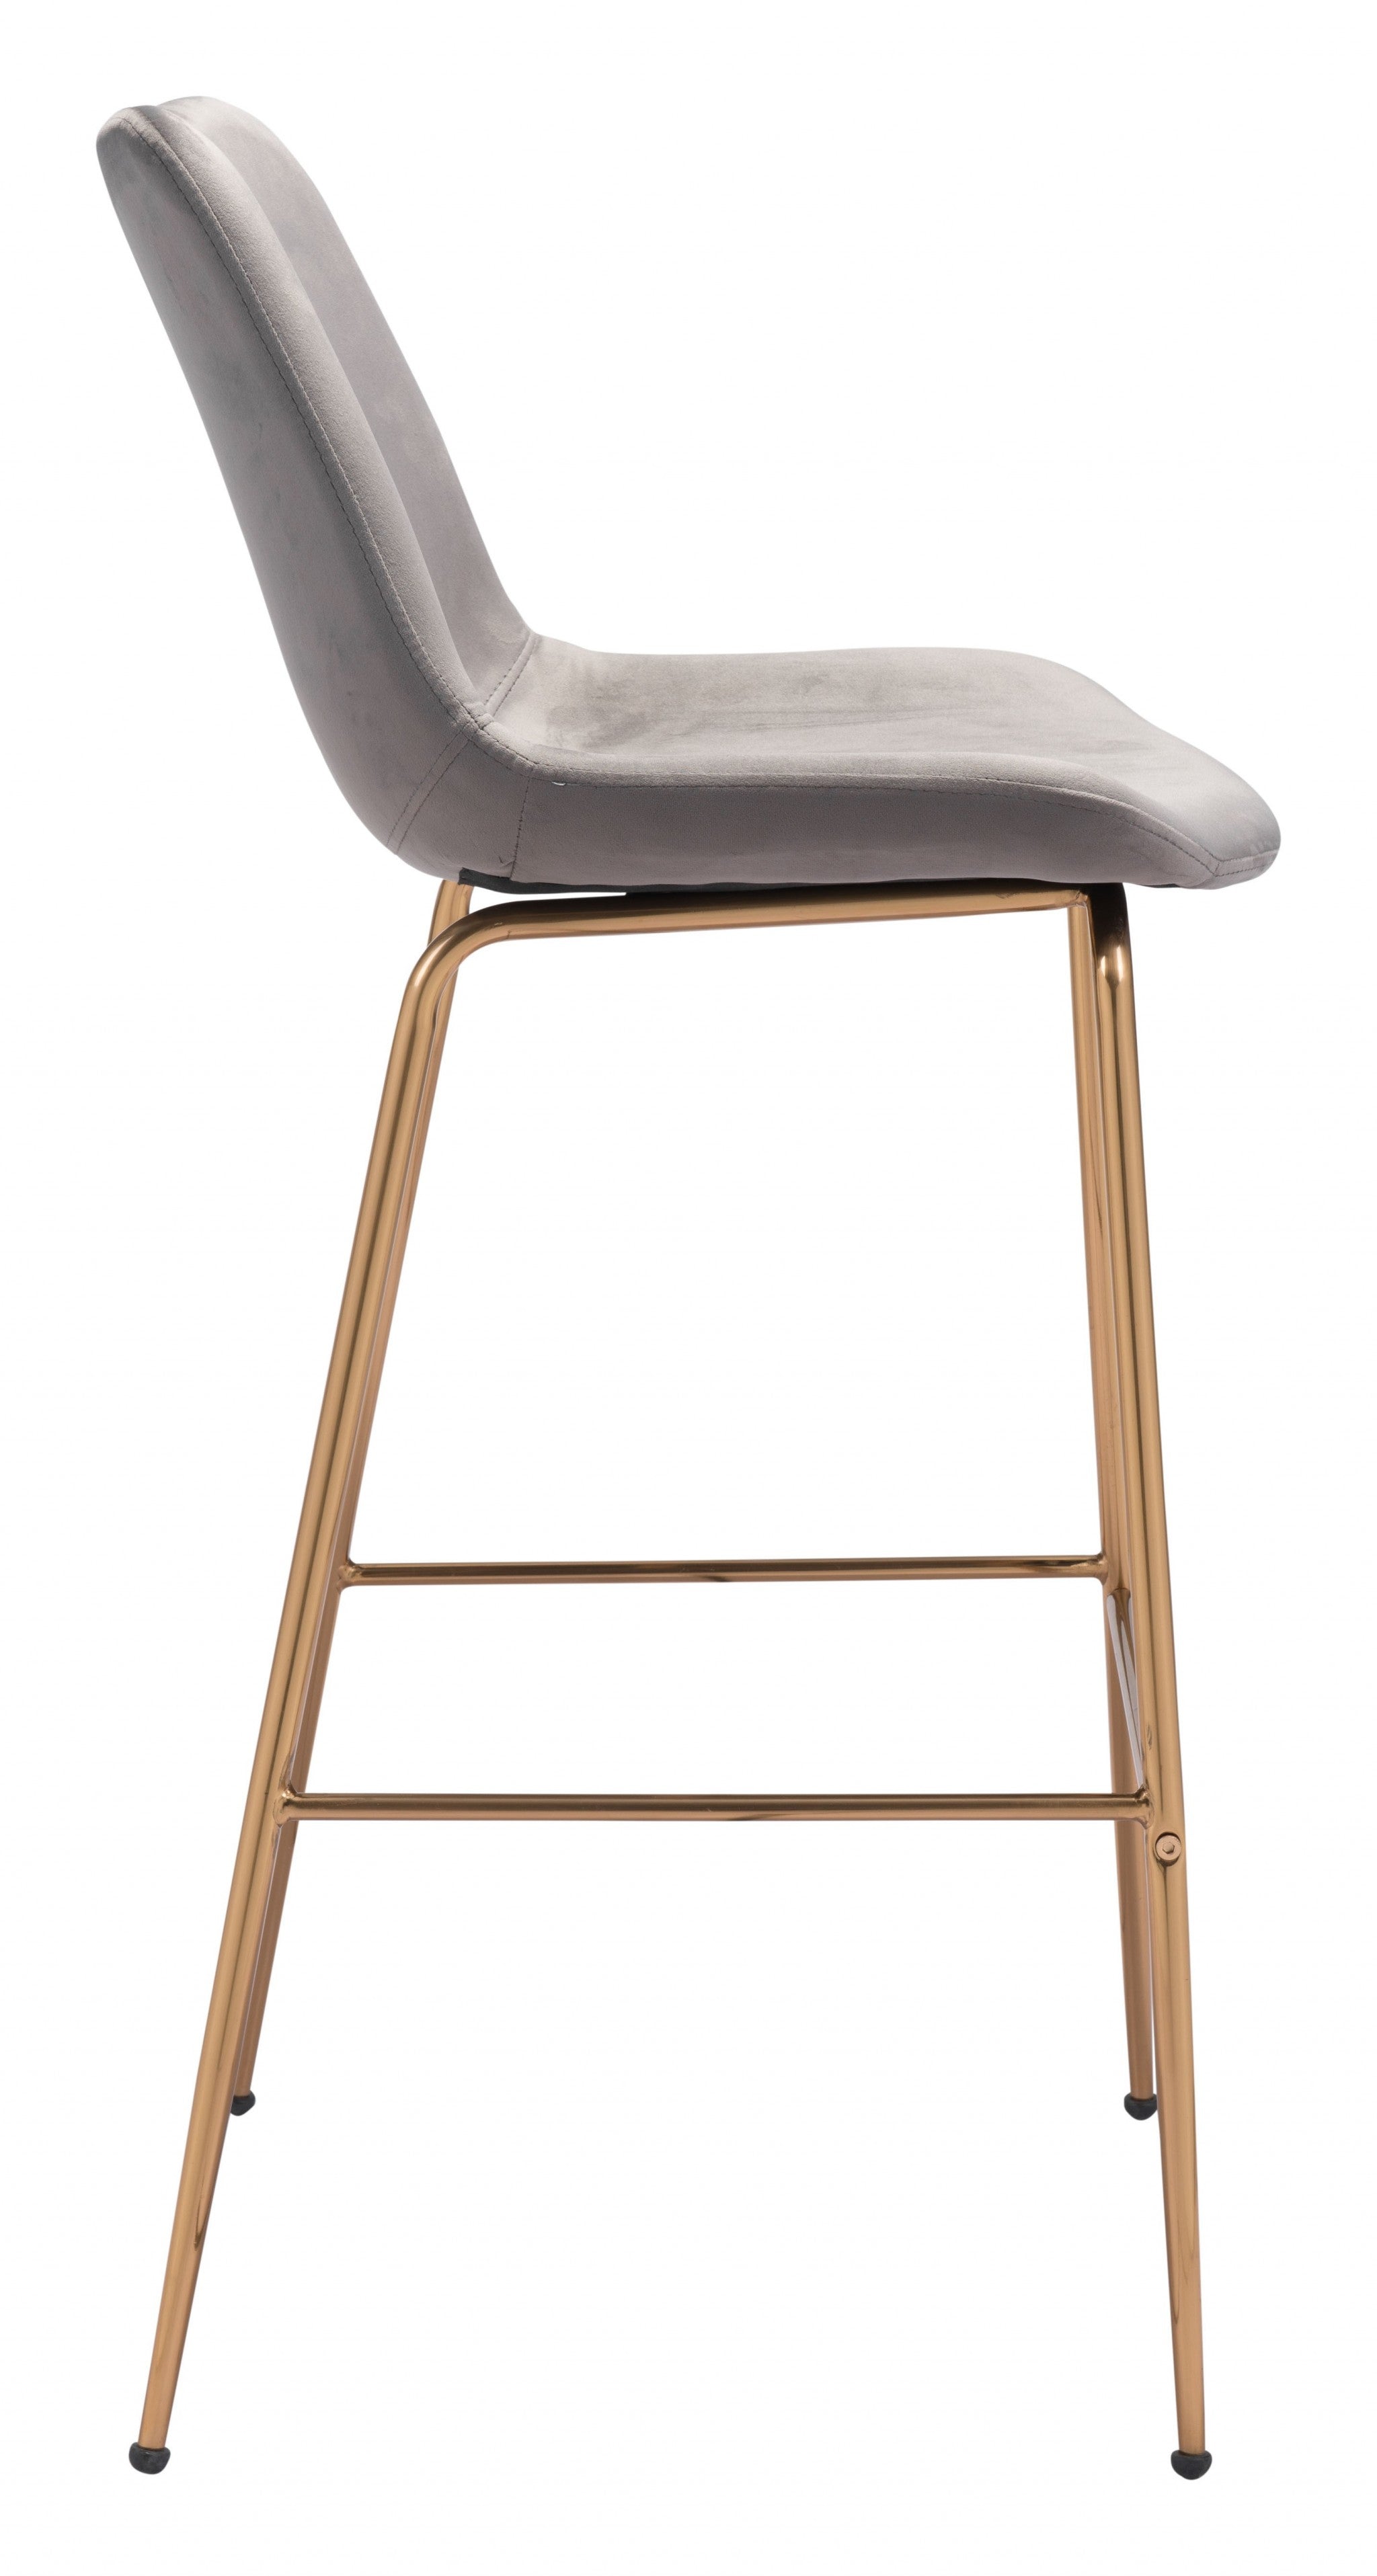 31" Gray And Copper Steel Low Back Bar Height Bar Chair